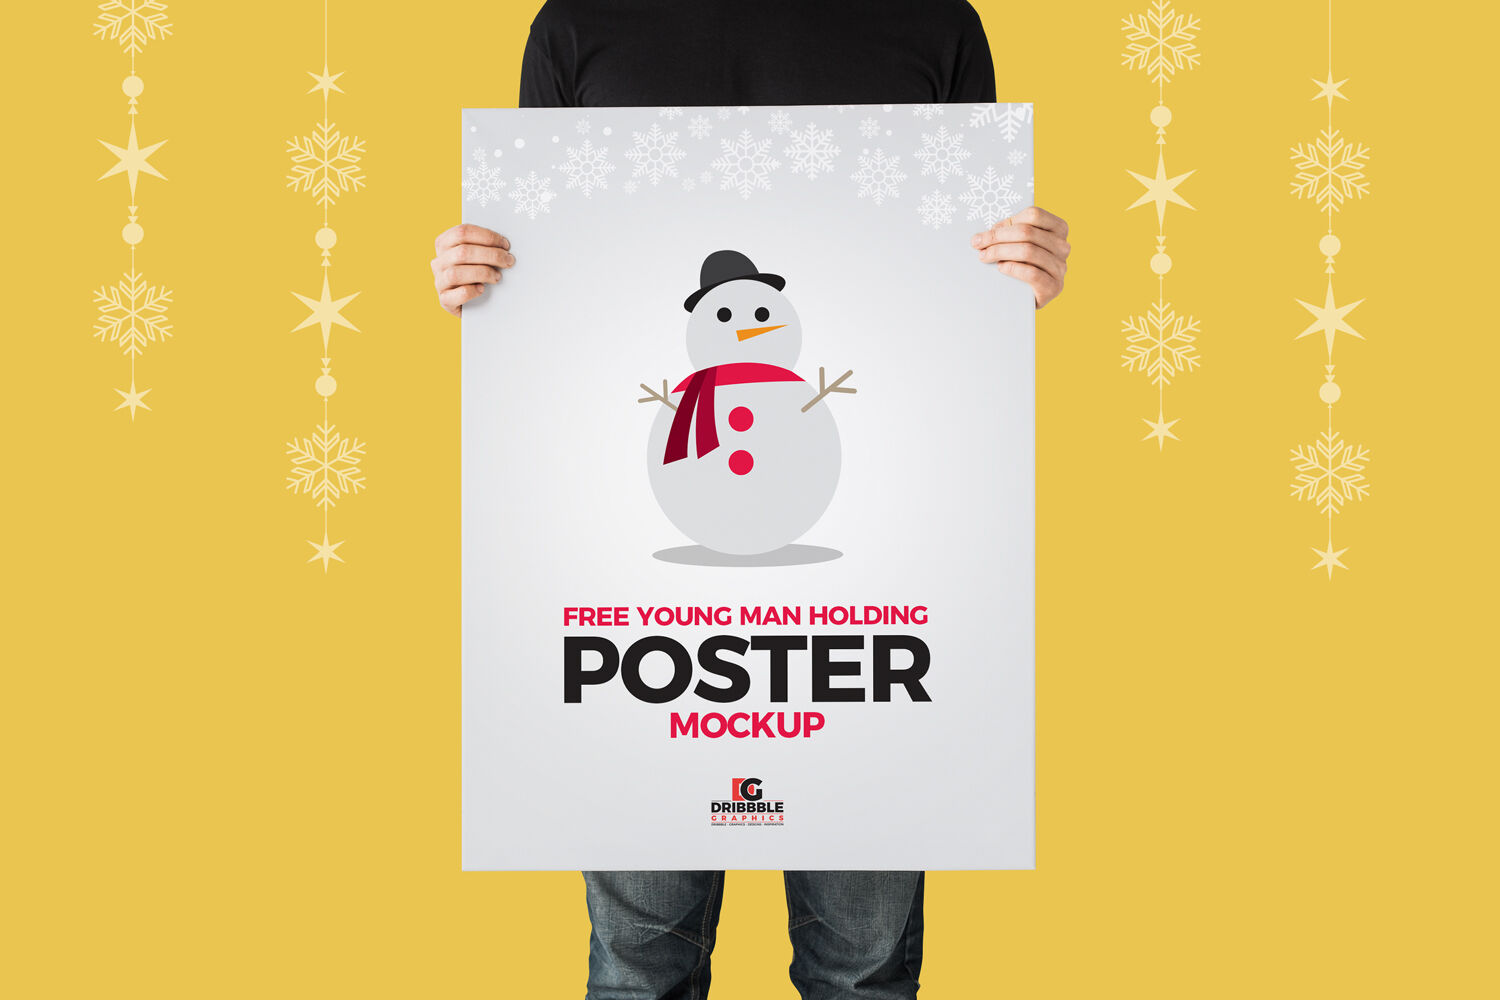 A3 Paper Grid Brand Poster Mockup Free by Poster Mockup on Dribbble